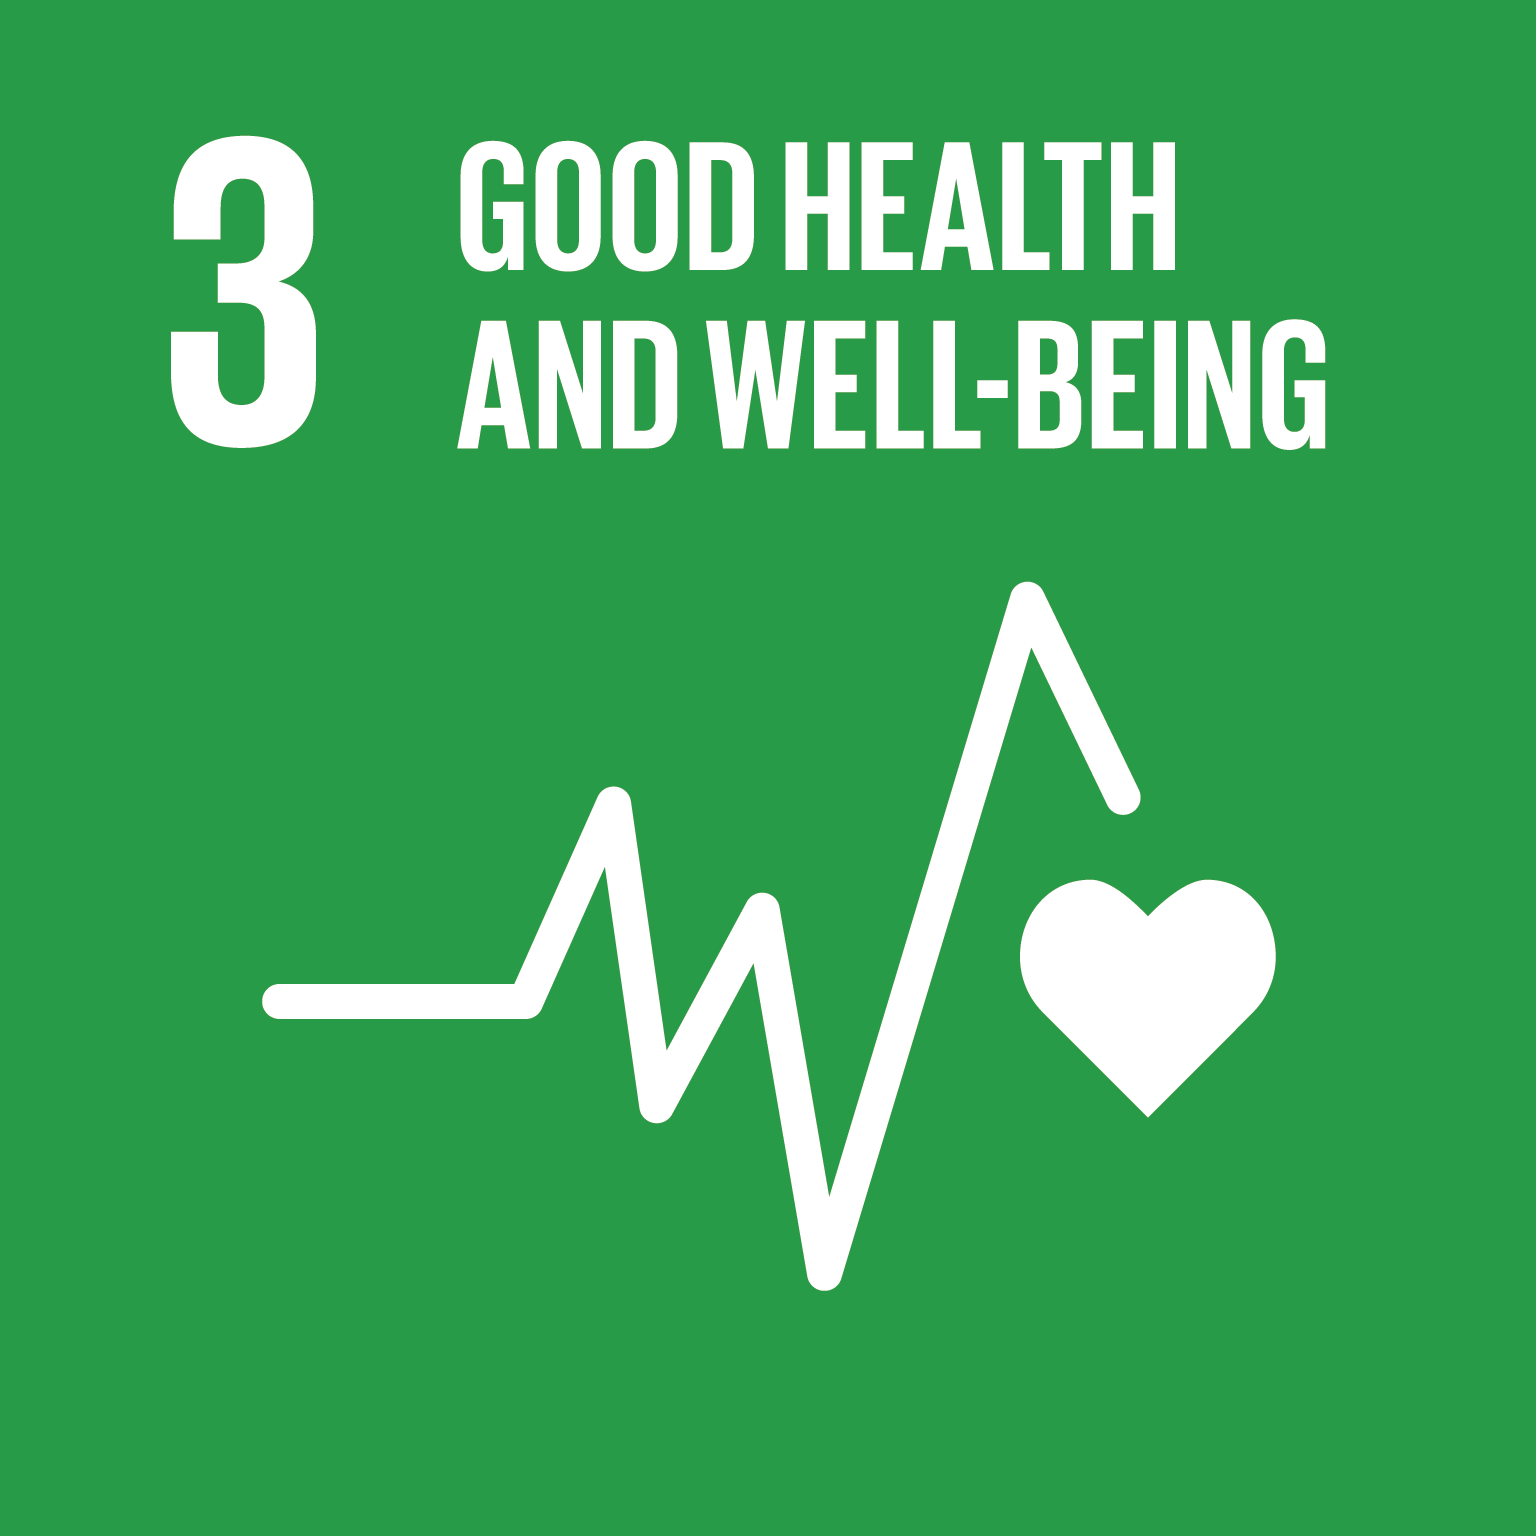 3 - good health and well-being